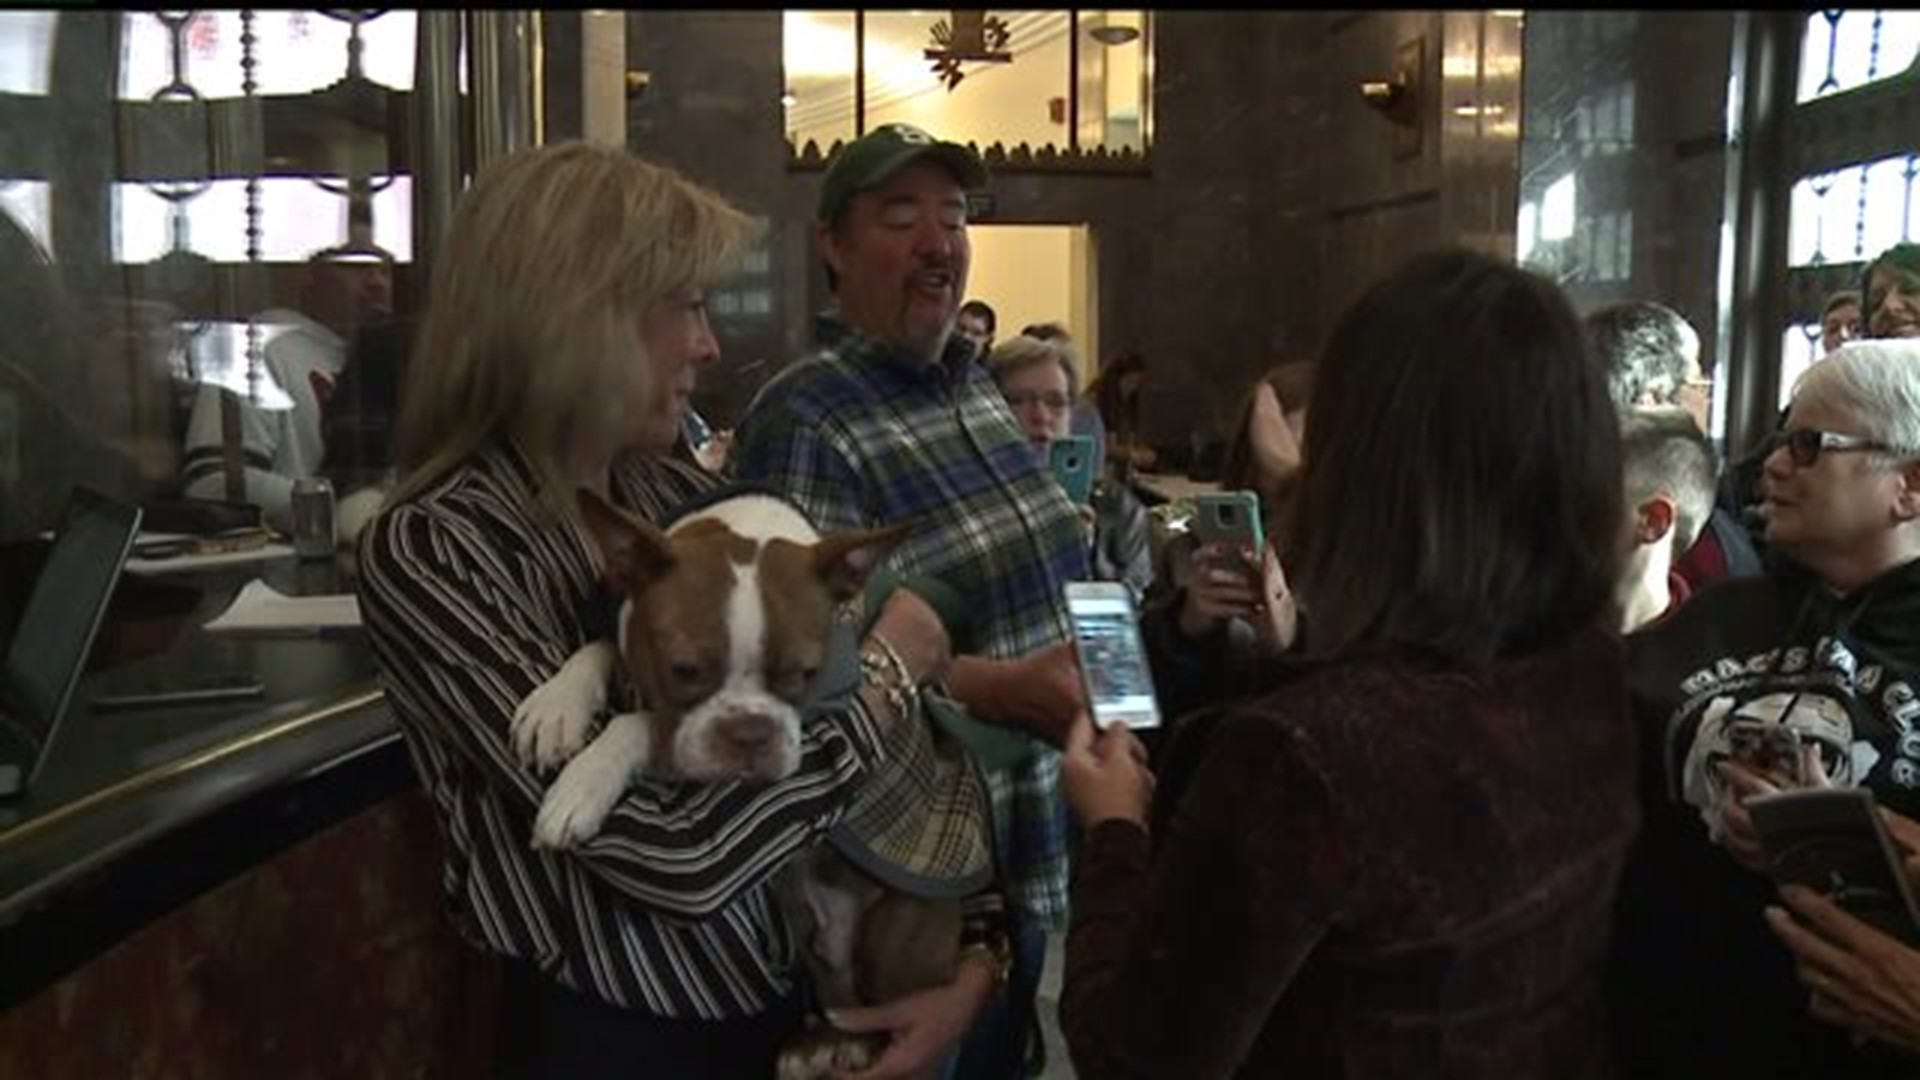 A popular pup makes his first movie premiere appearance